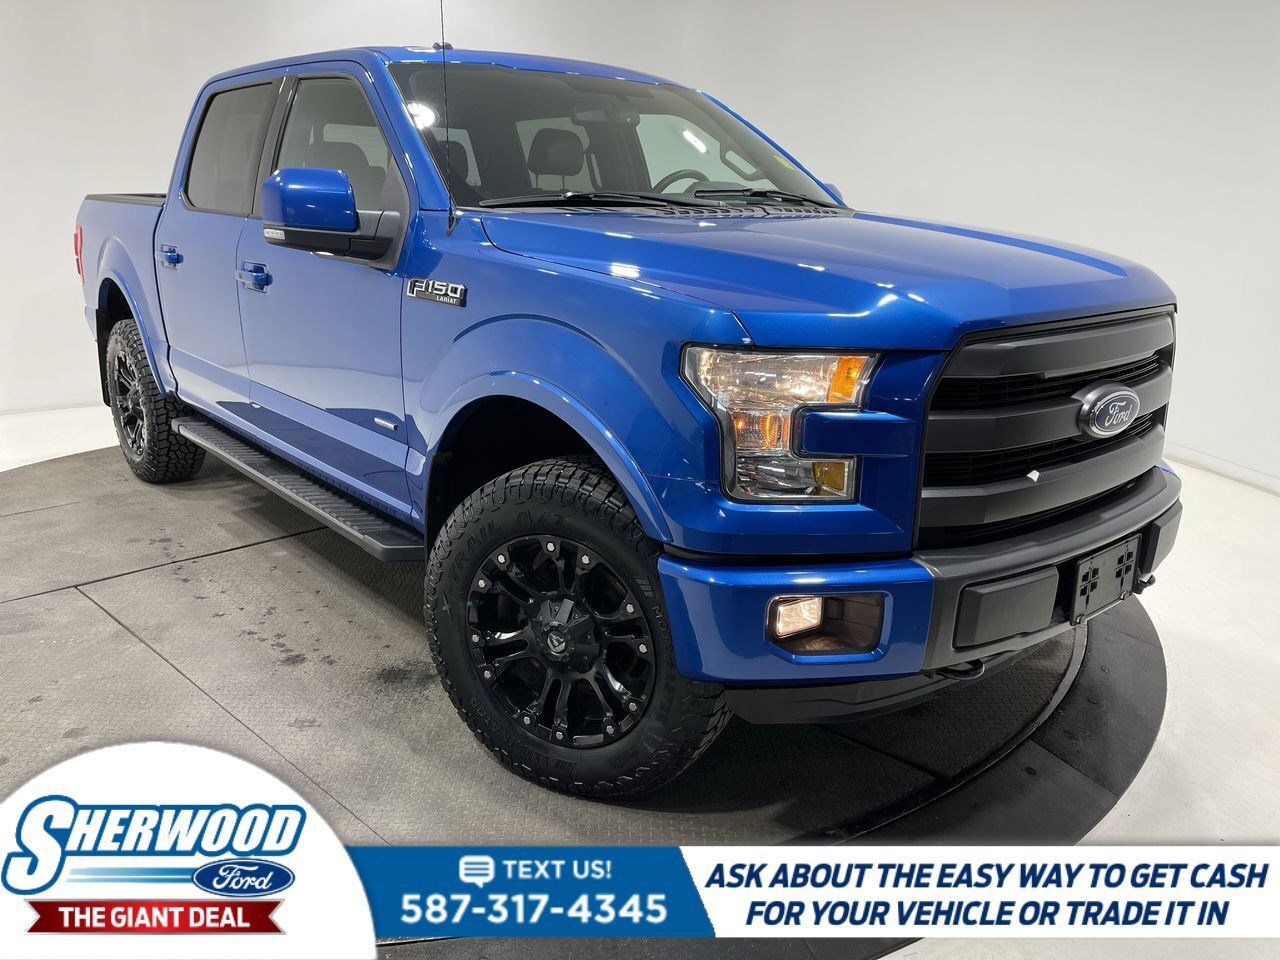 2015 Ford F-150 Lariat - $0 Down $252 Weekly - CLEAN CARFAX